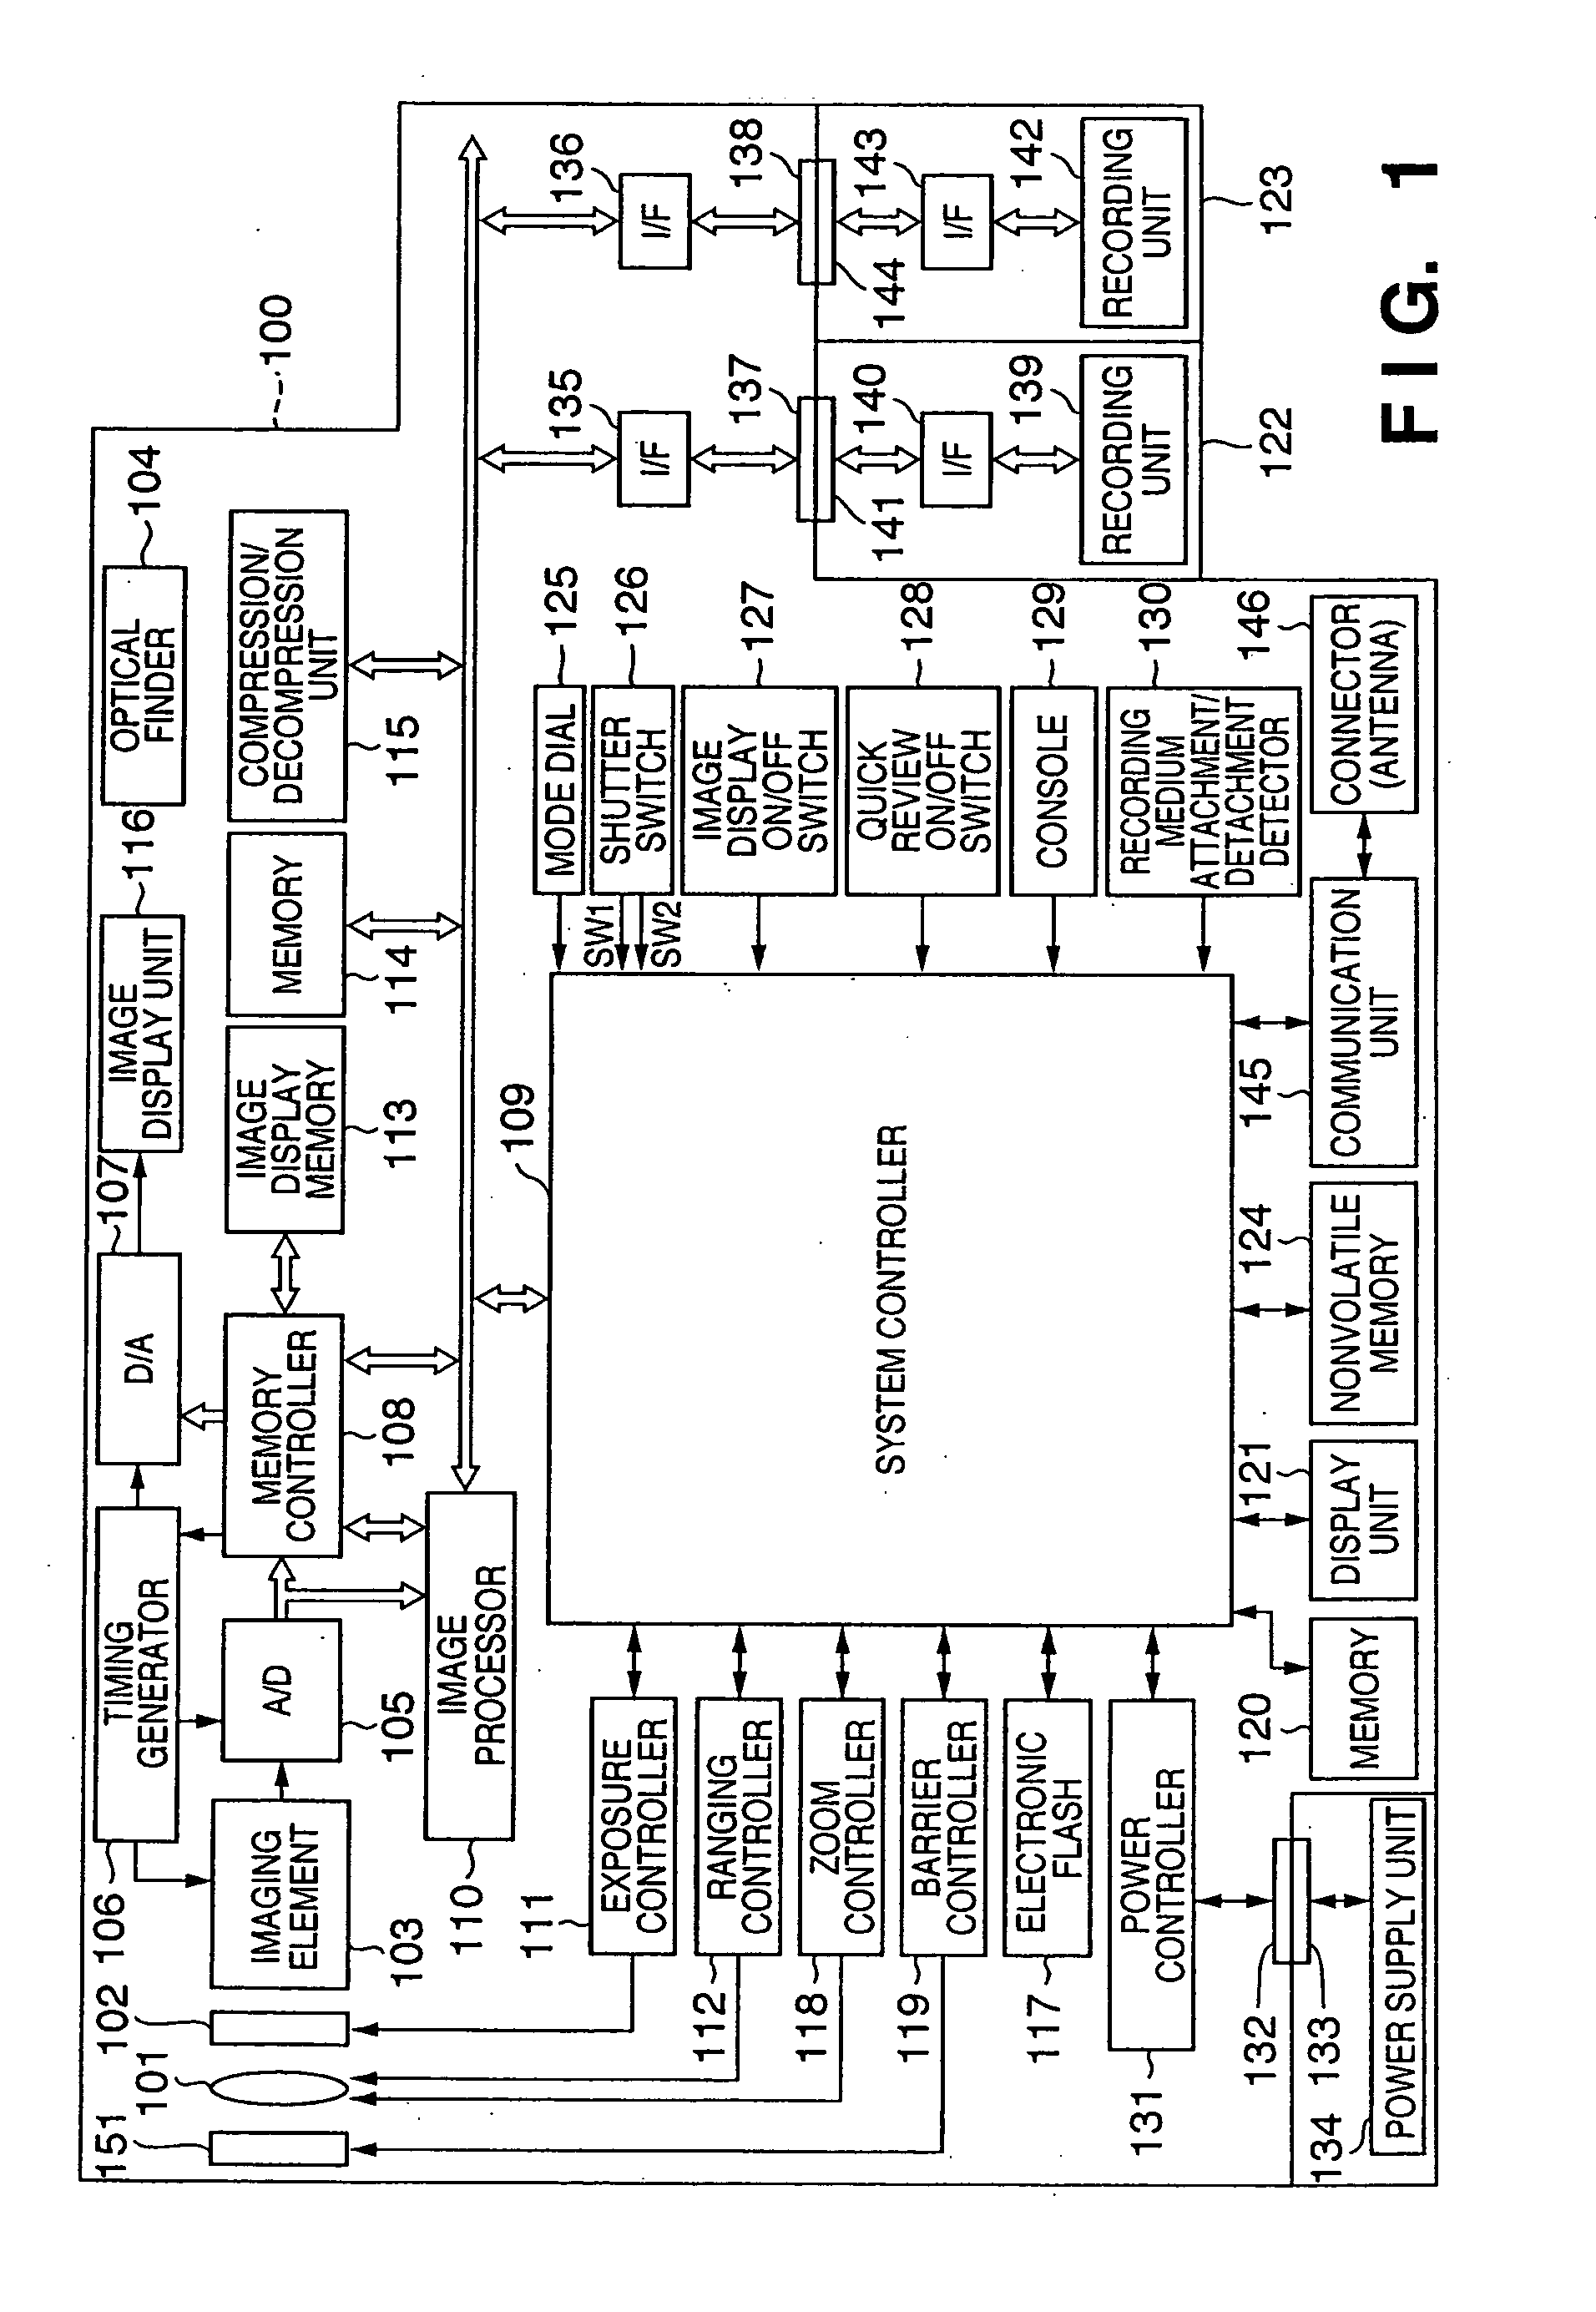 Imaging apparatus and its control method